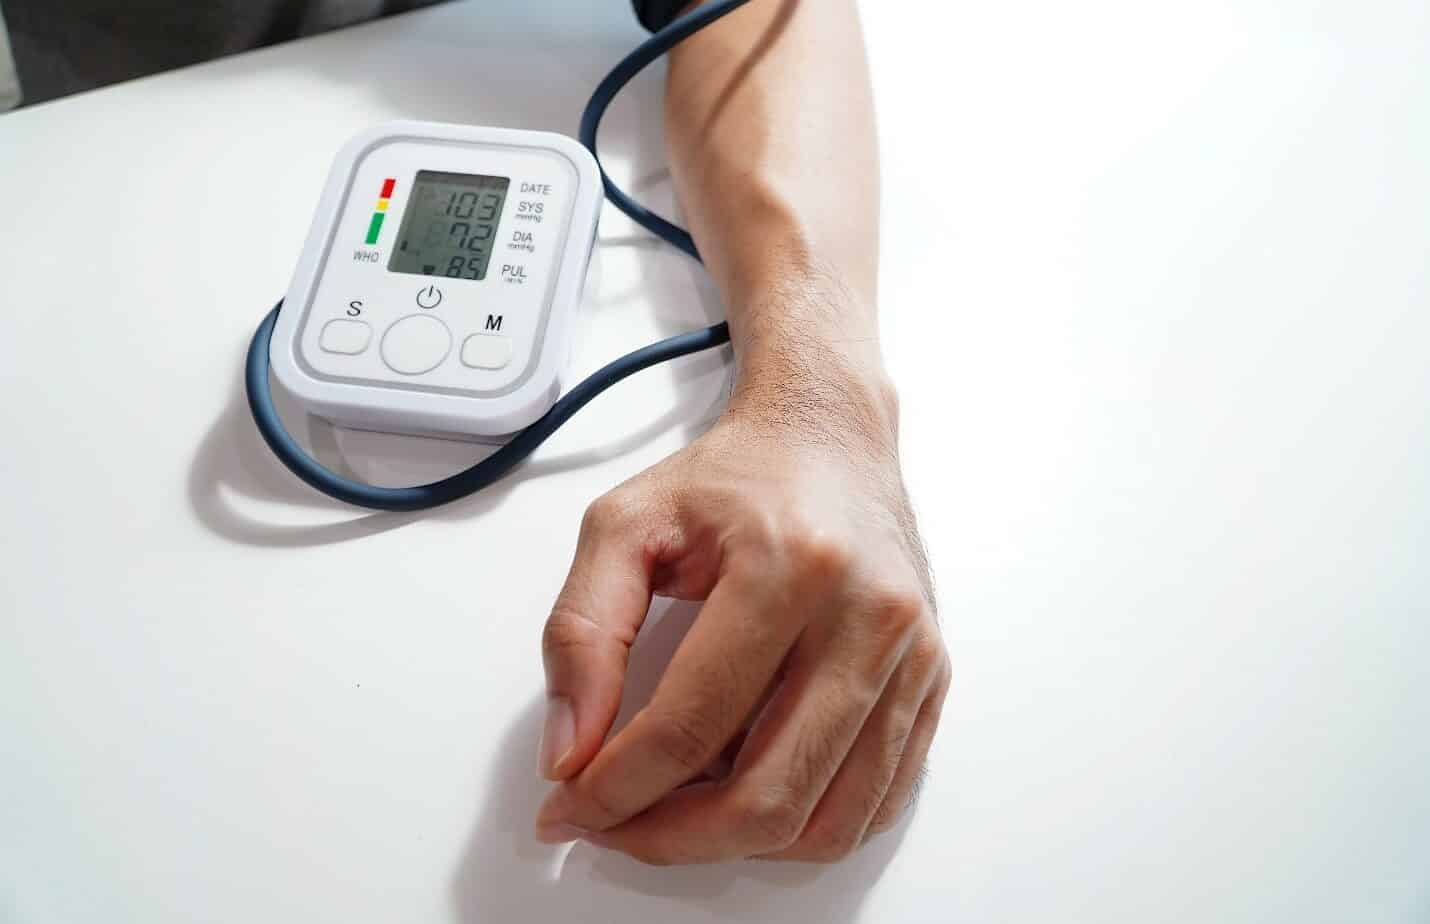 Are Risks to Wellness Decreased with Remote Patient Monitoring